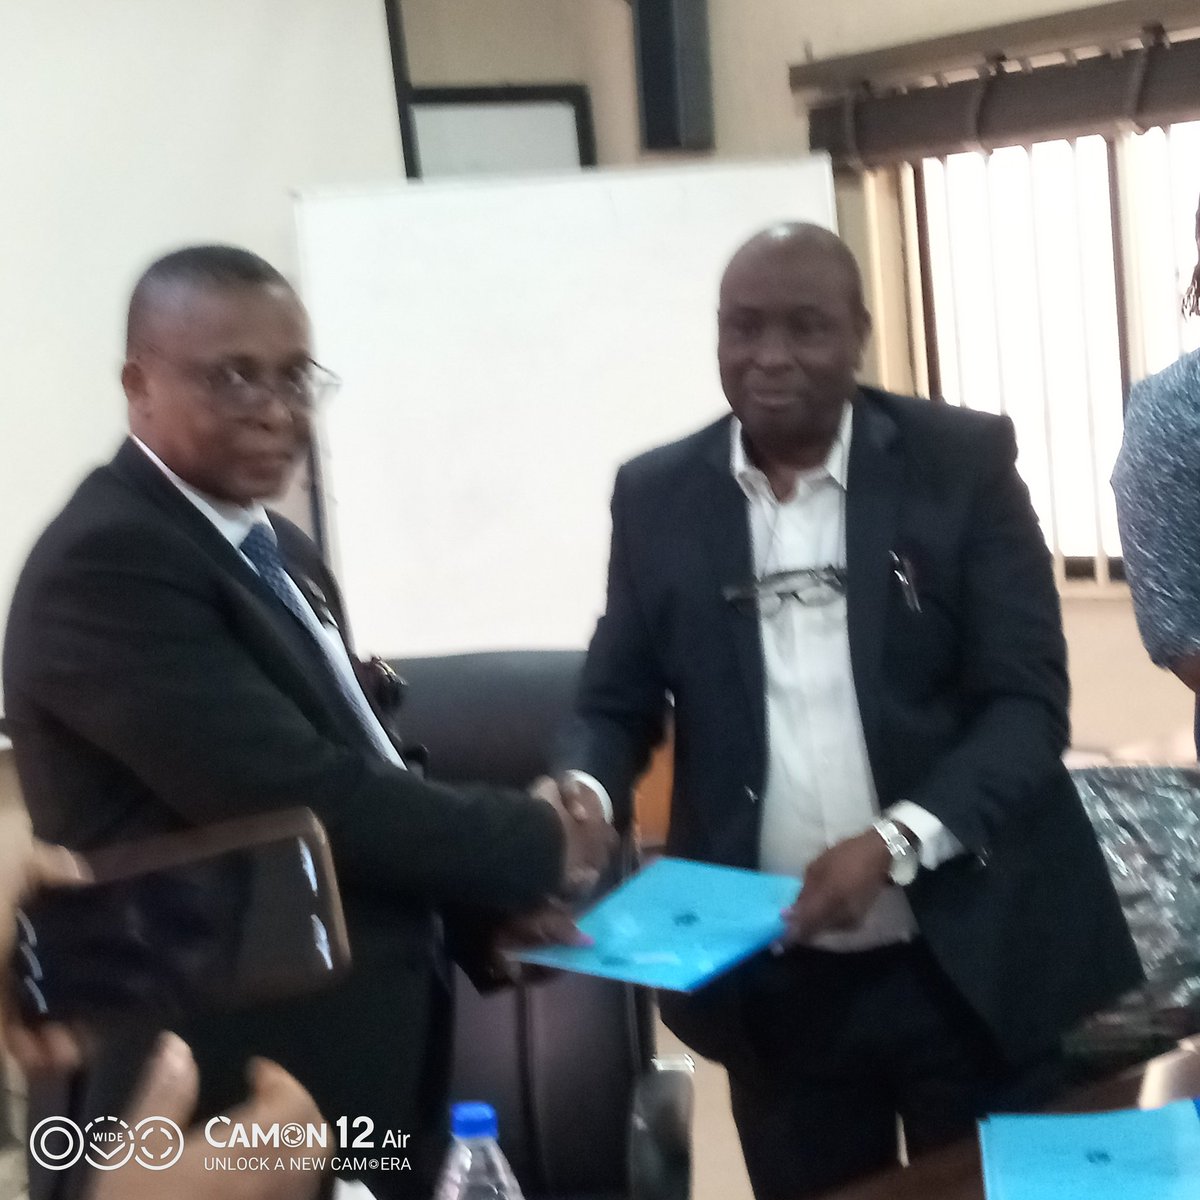 The Director General Dr Samuel Etatuvie @sametatuvie hosted Prof Owunari Abraham Georgewill @Owunarigeorgew1 The Vice Chancellor and Dr. Eucharia Oluchi Nwaichi @EuchariaN The Director, Exchange & Linkage Programs Unit of University of Port Harcourt, Rivers State to sign an MoU